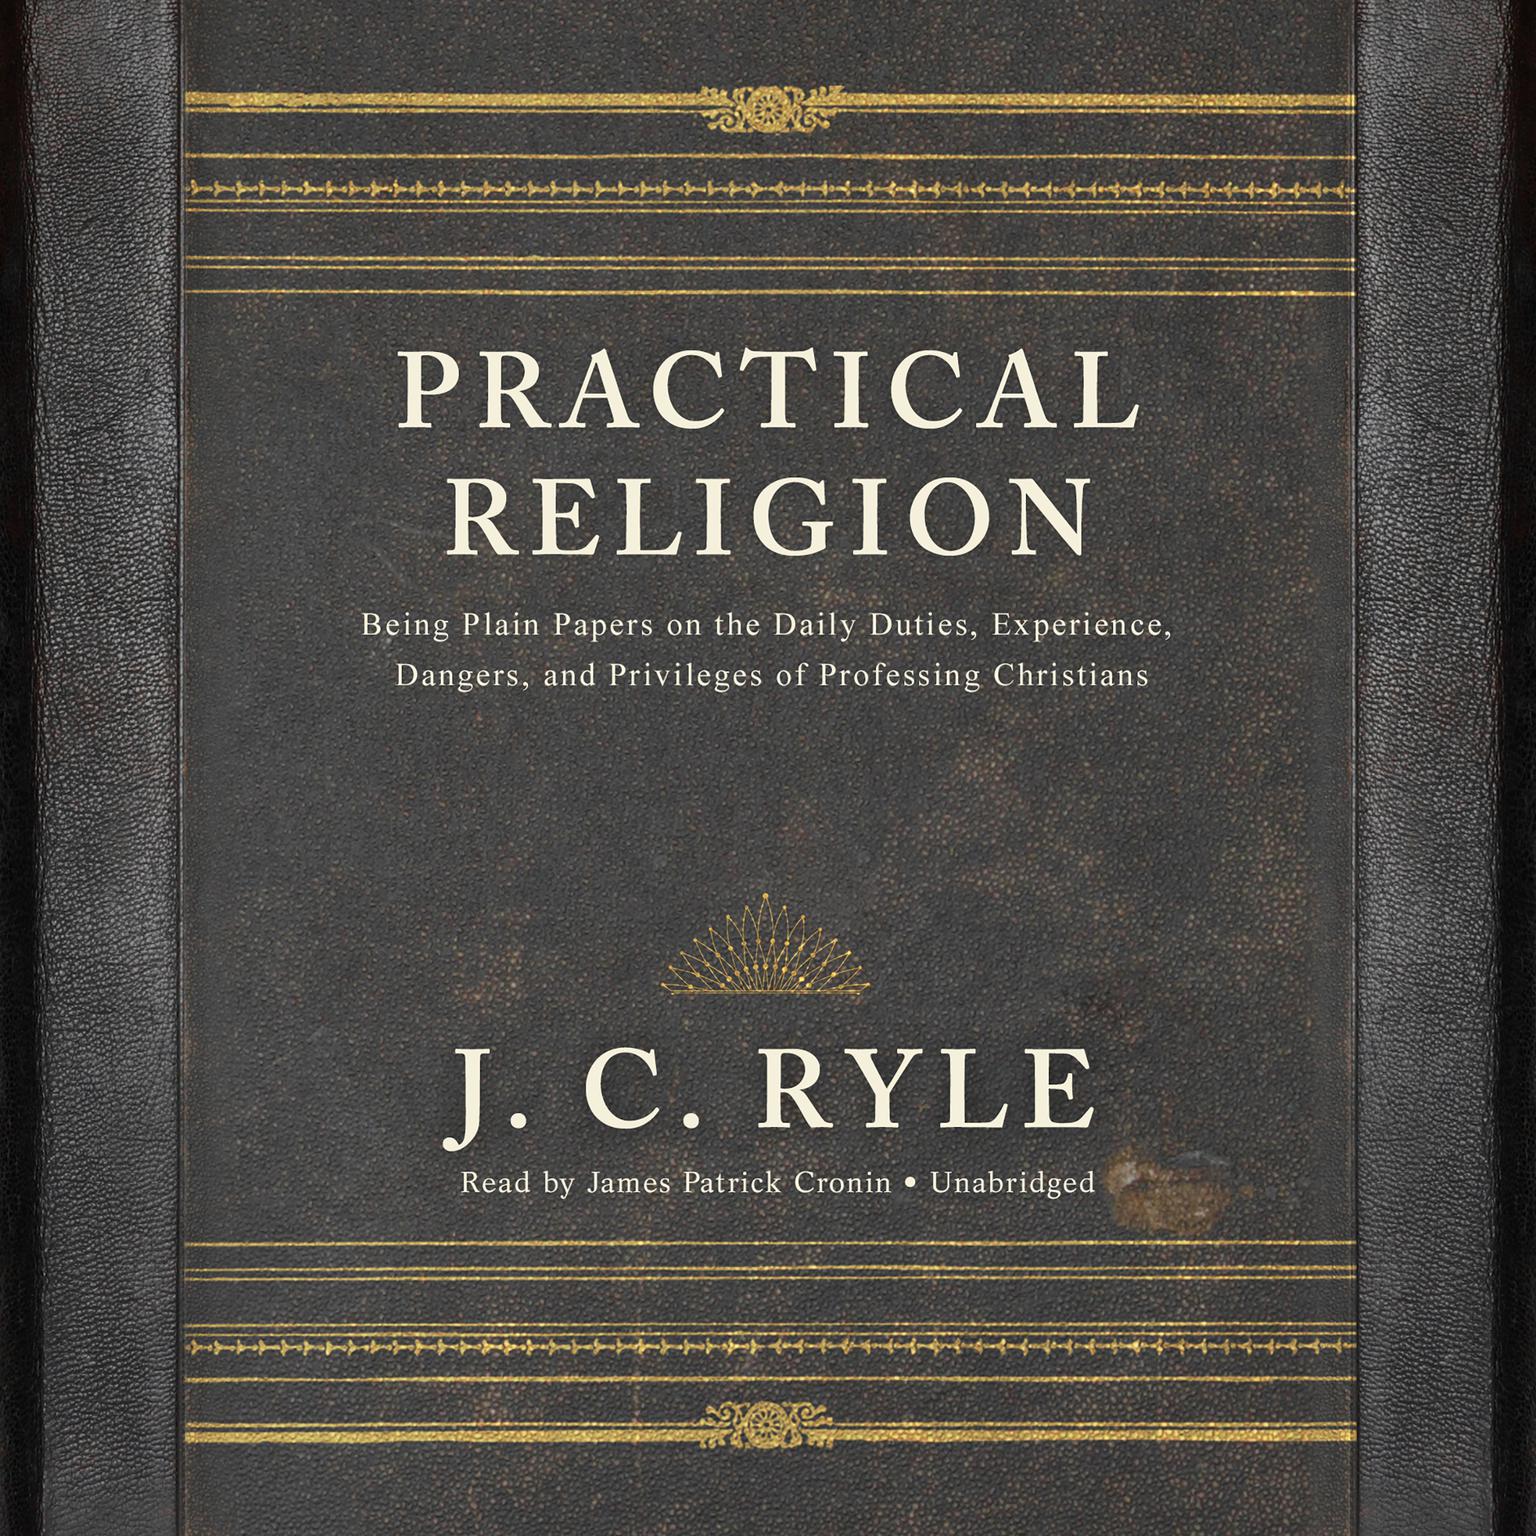 Practical Religion: Being Plain Papers on the Daily Duties, Experience, Dangers, and Privileges of Professing Christians Audiobook, by J. C. Ryle